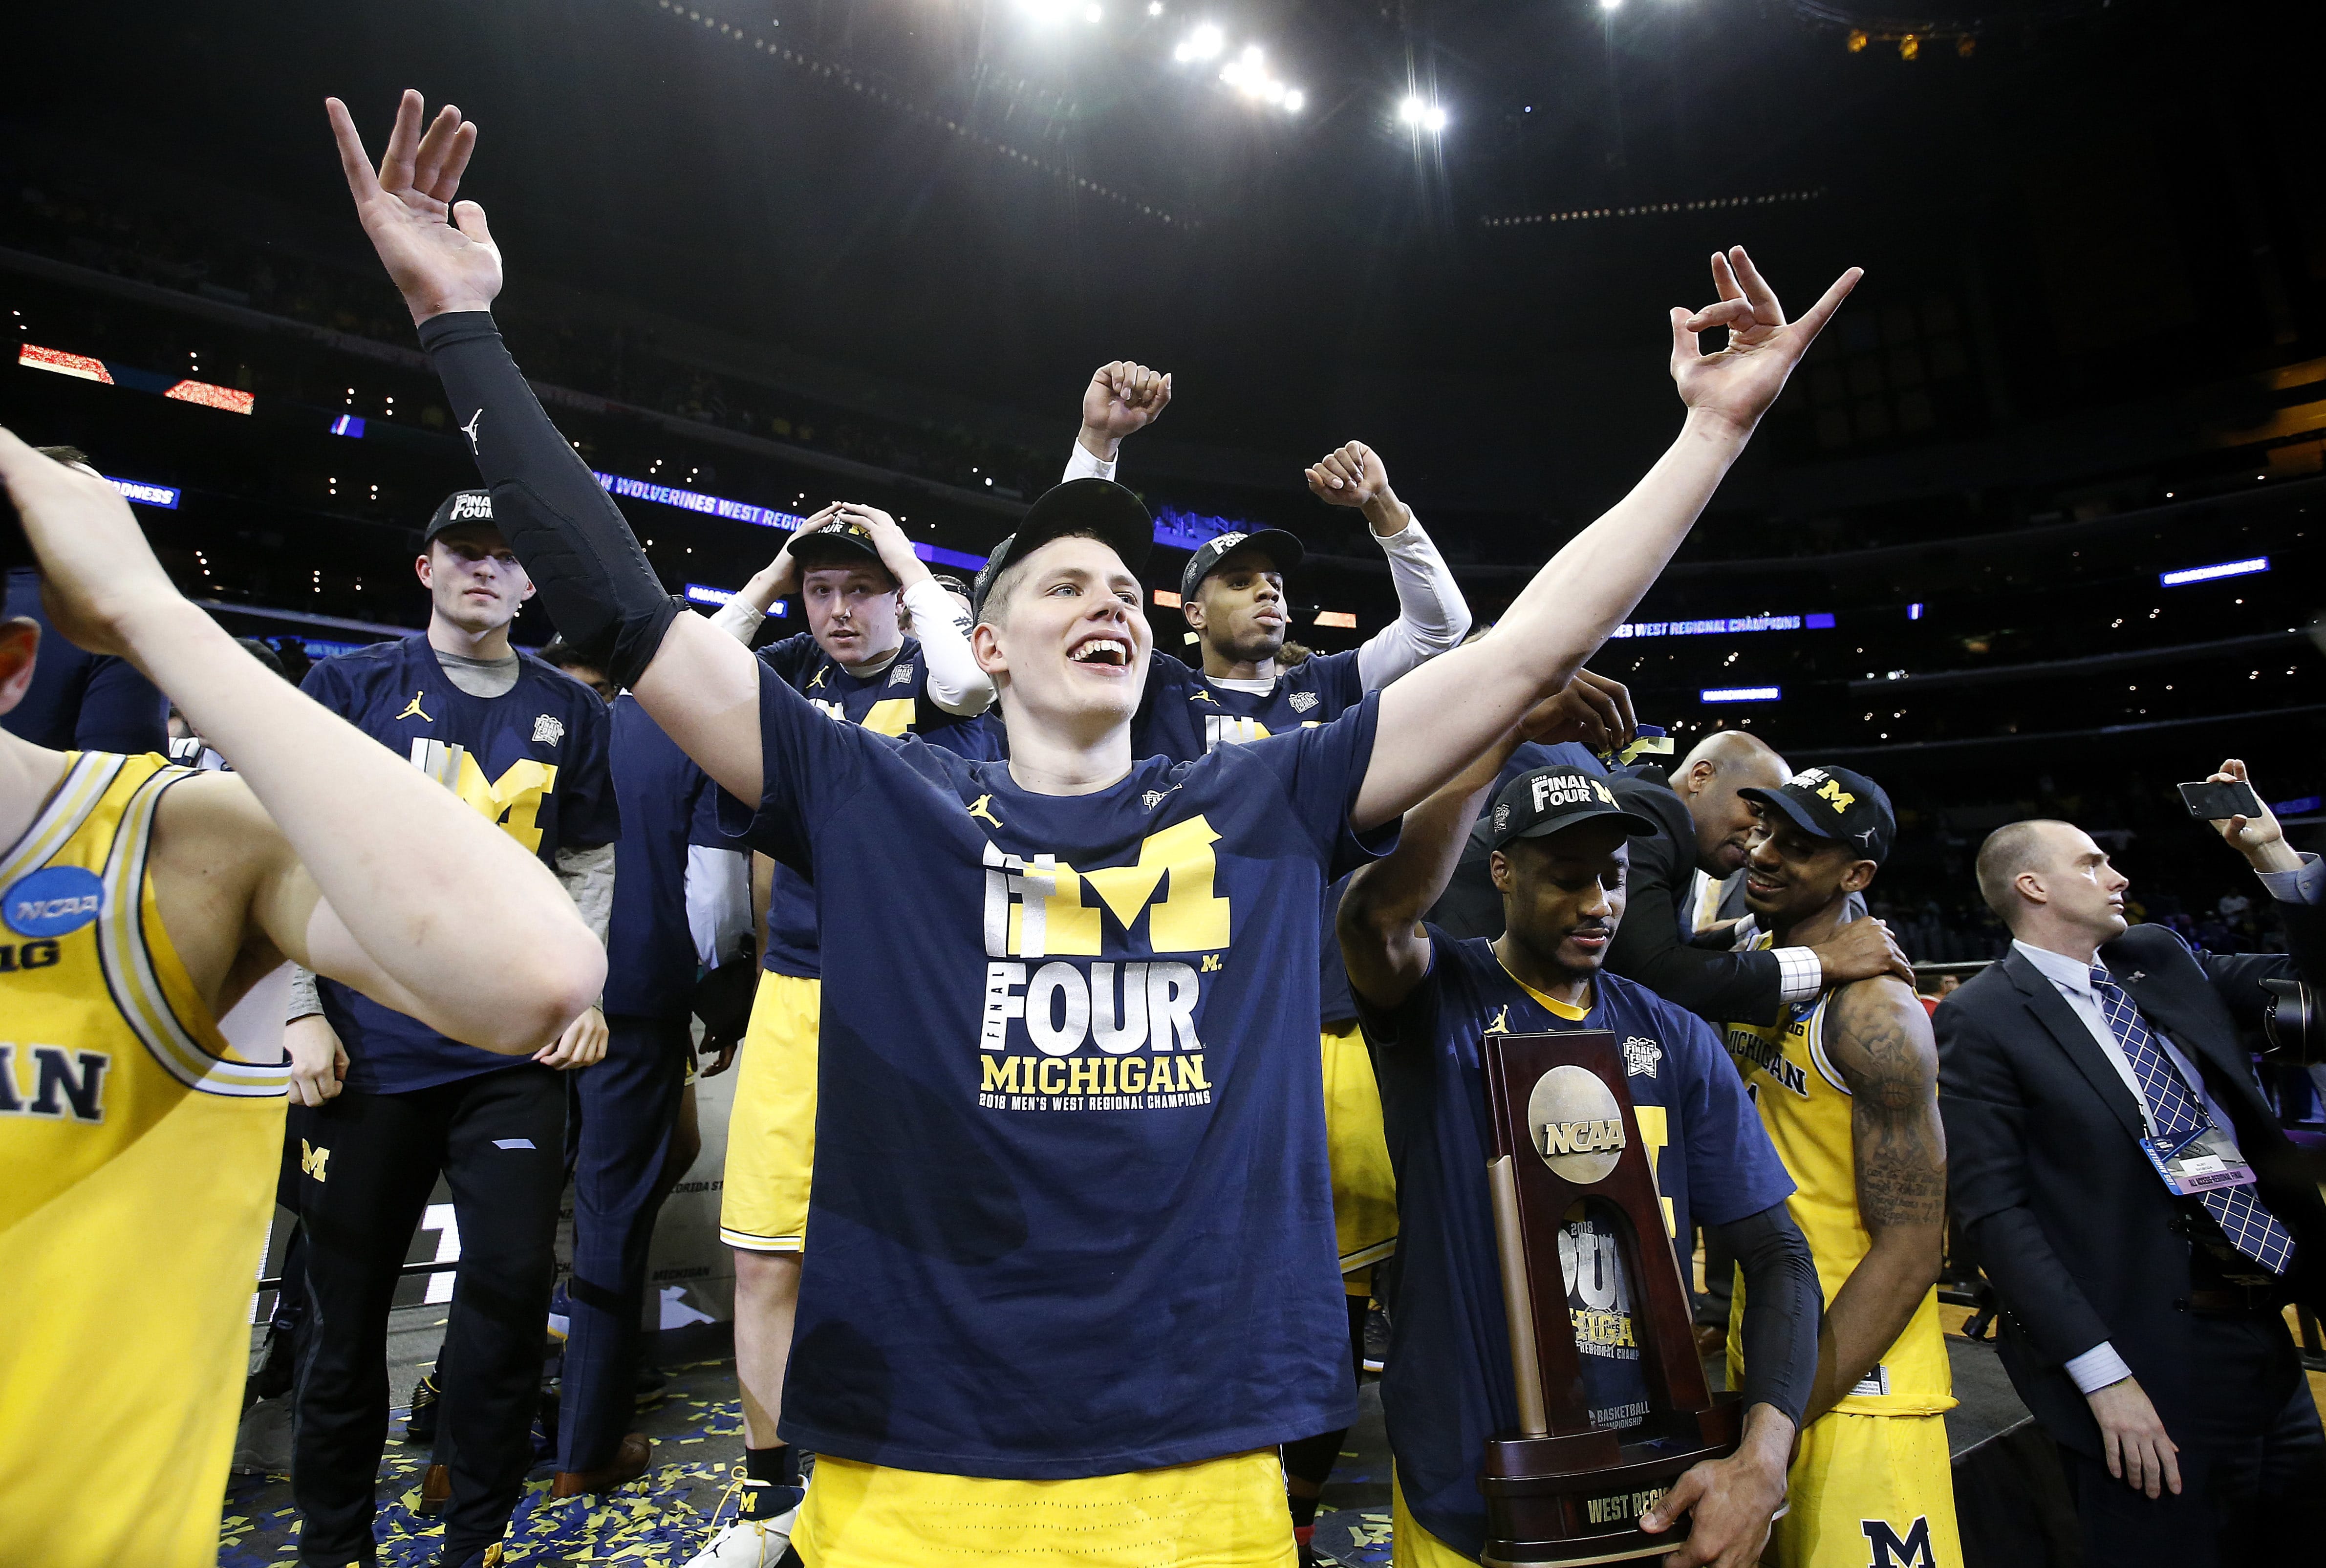 Michigan forward Moritz Wagner, foreground, and teammates celebrate after defeating Florida State 58-54 in an NCAA men's college basketball tournament regional final Saturday, March 24, 2018, in Los Angeles.